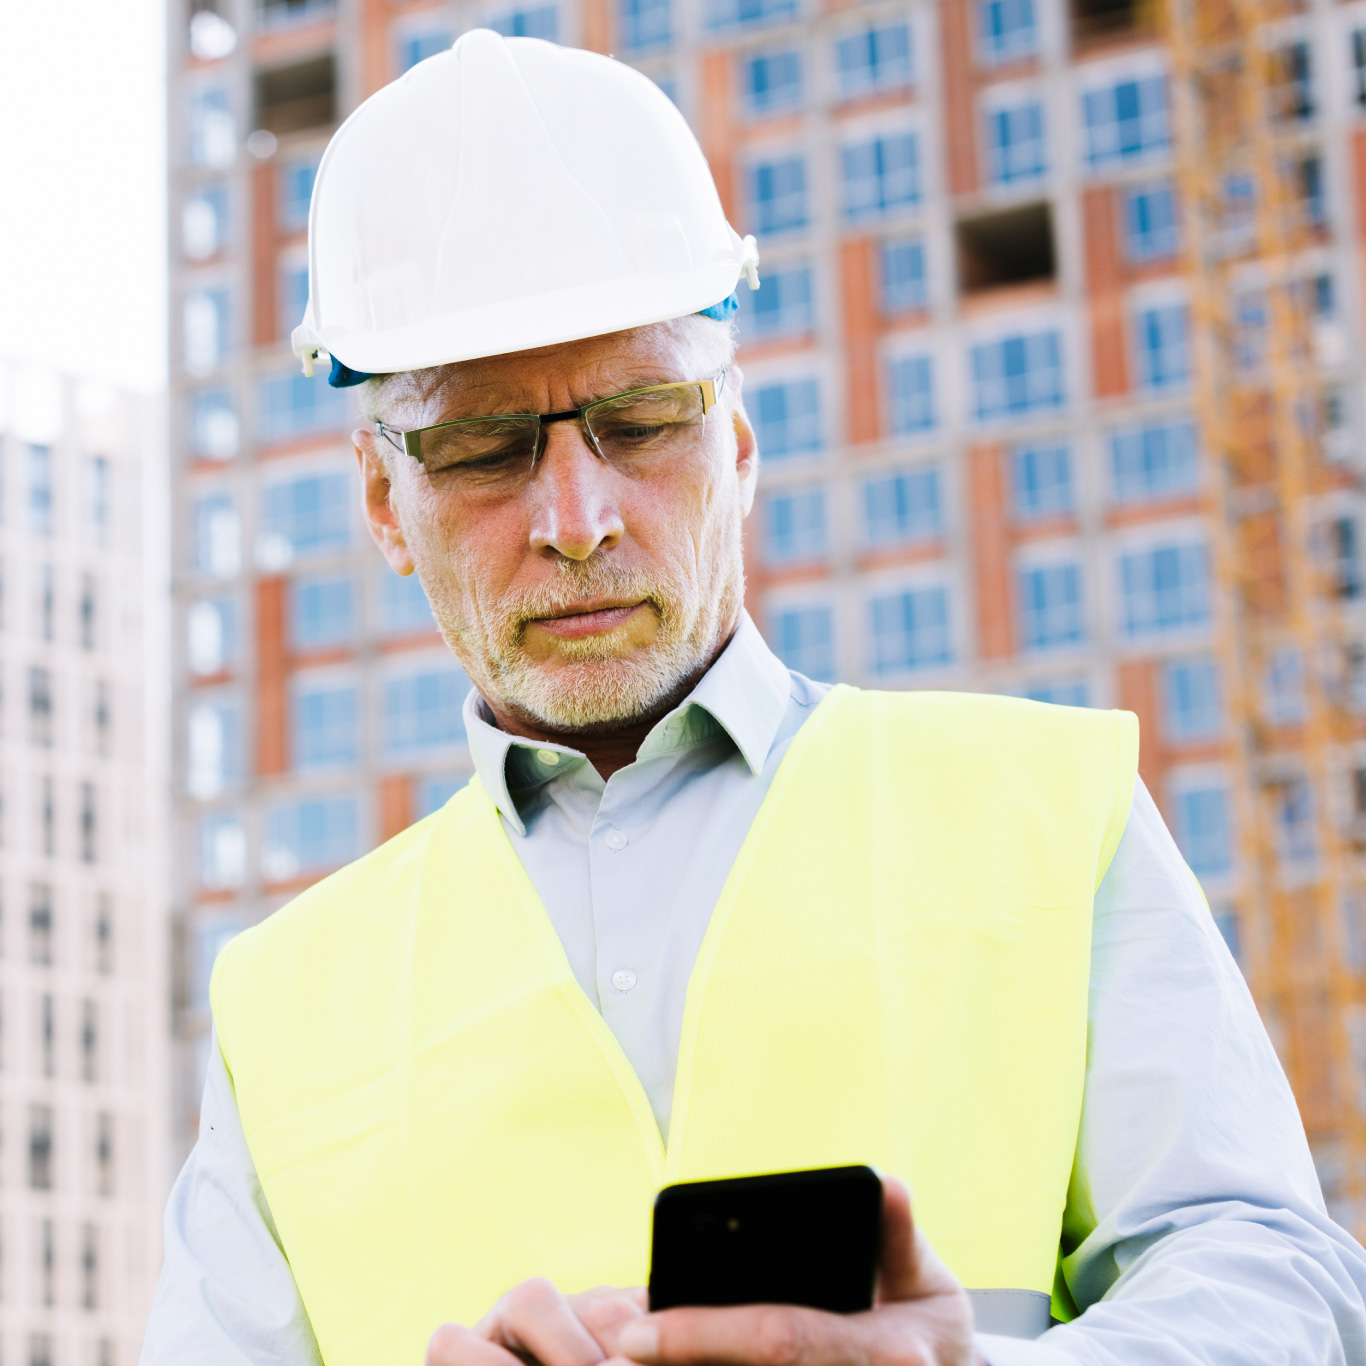 Photo of a man wearing a hard hat on a mobile phone